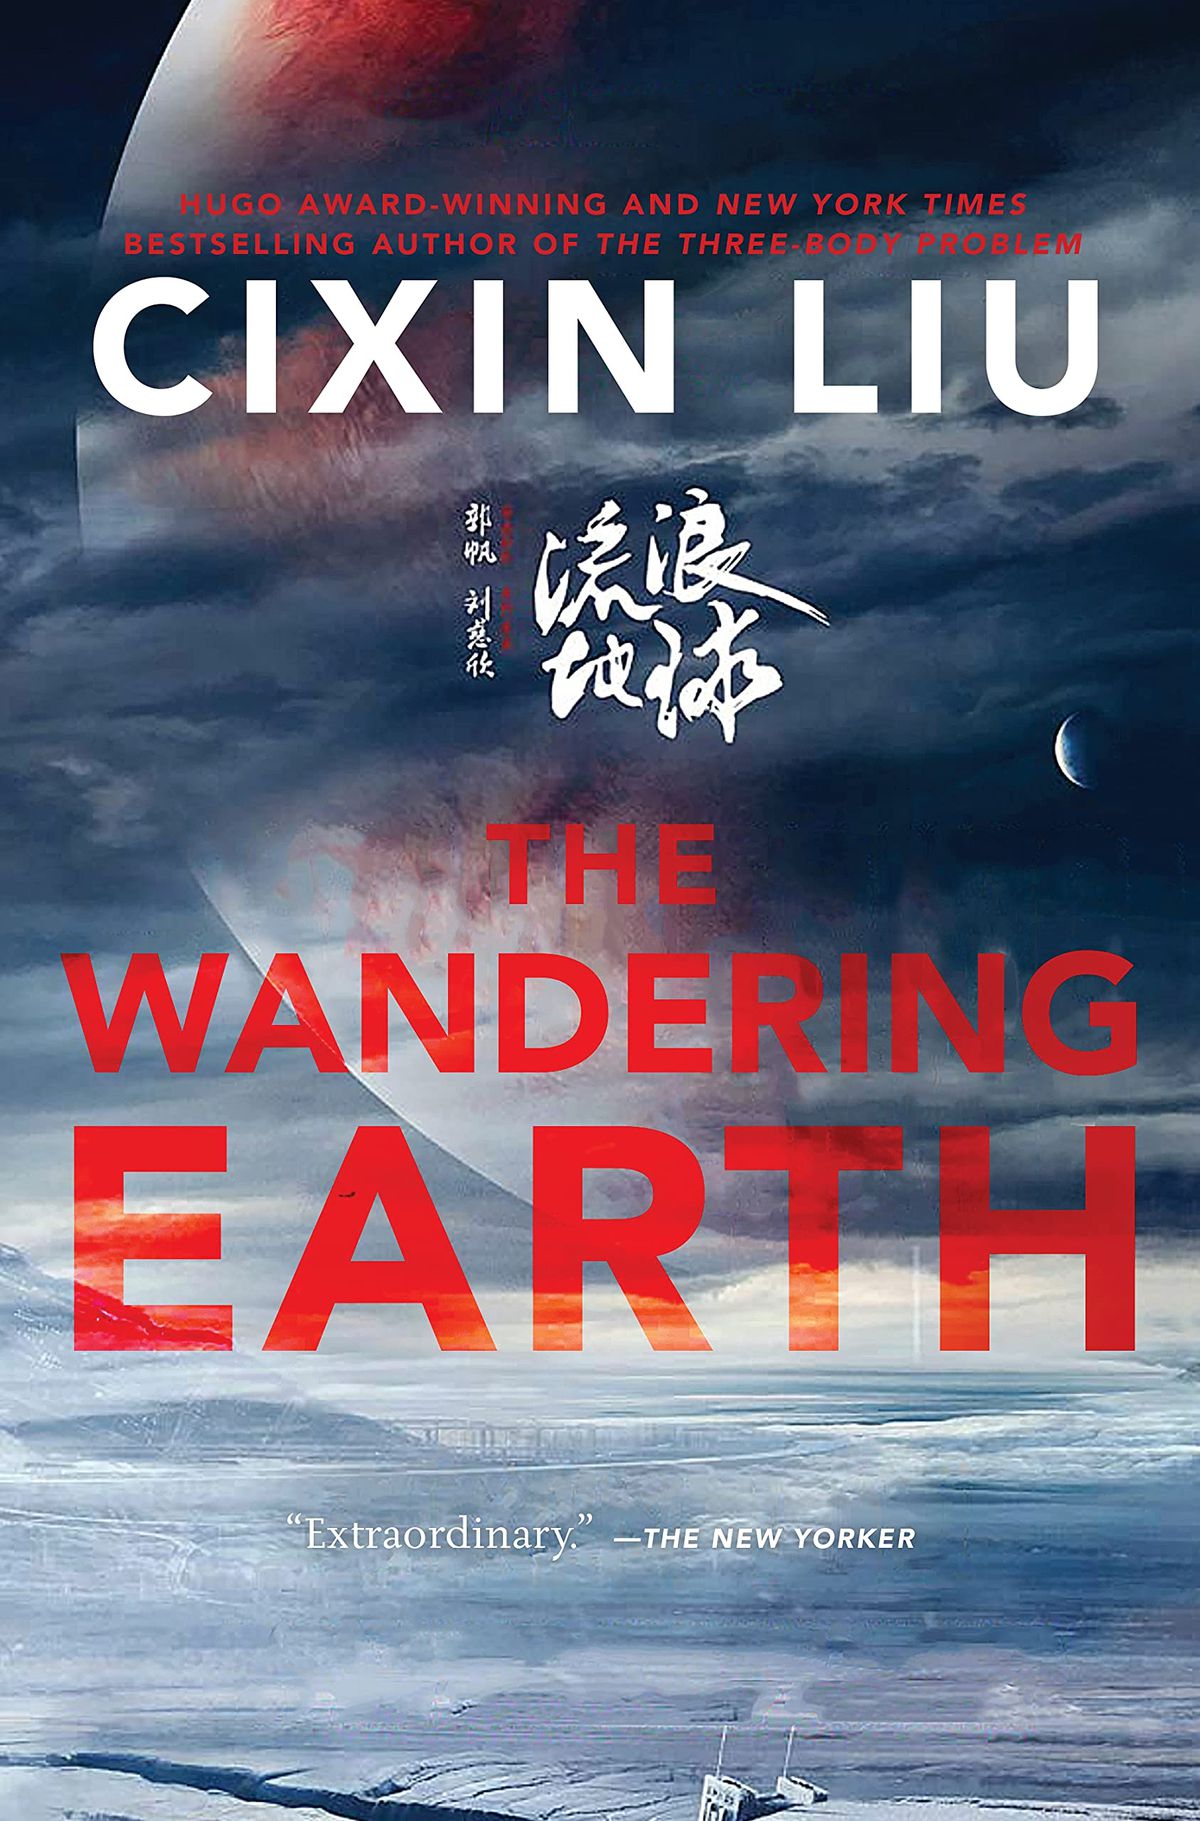 The Wandering Earth book cover with a giant planet in space